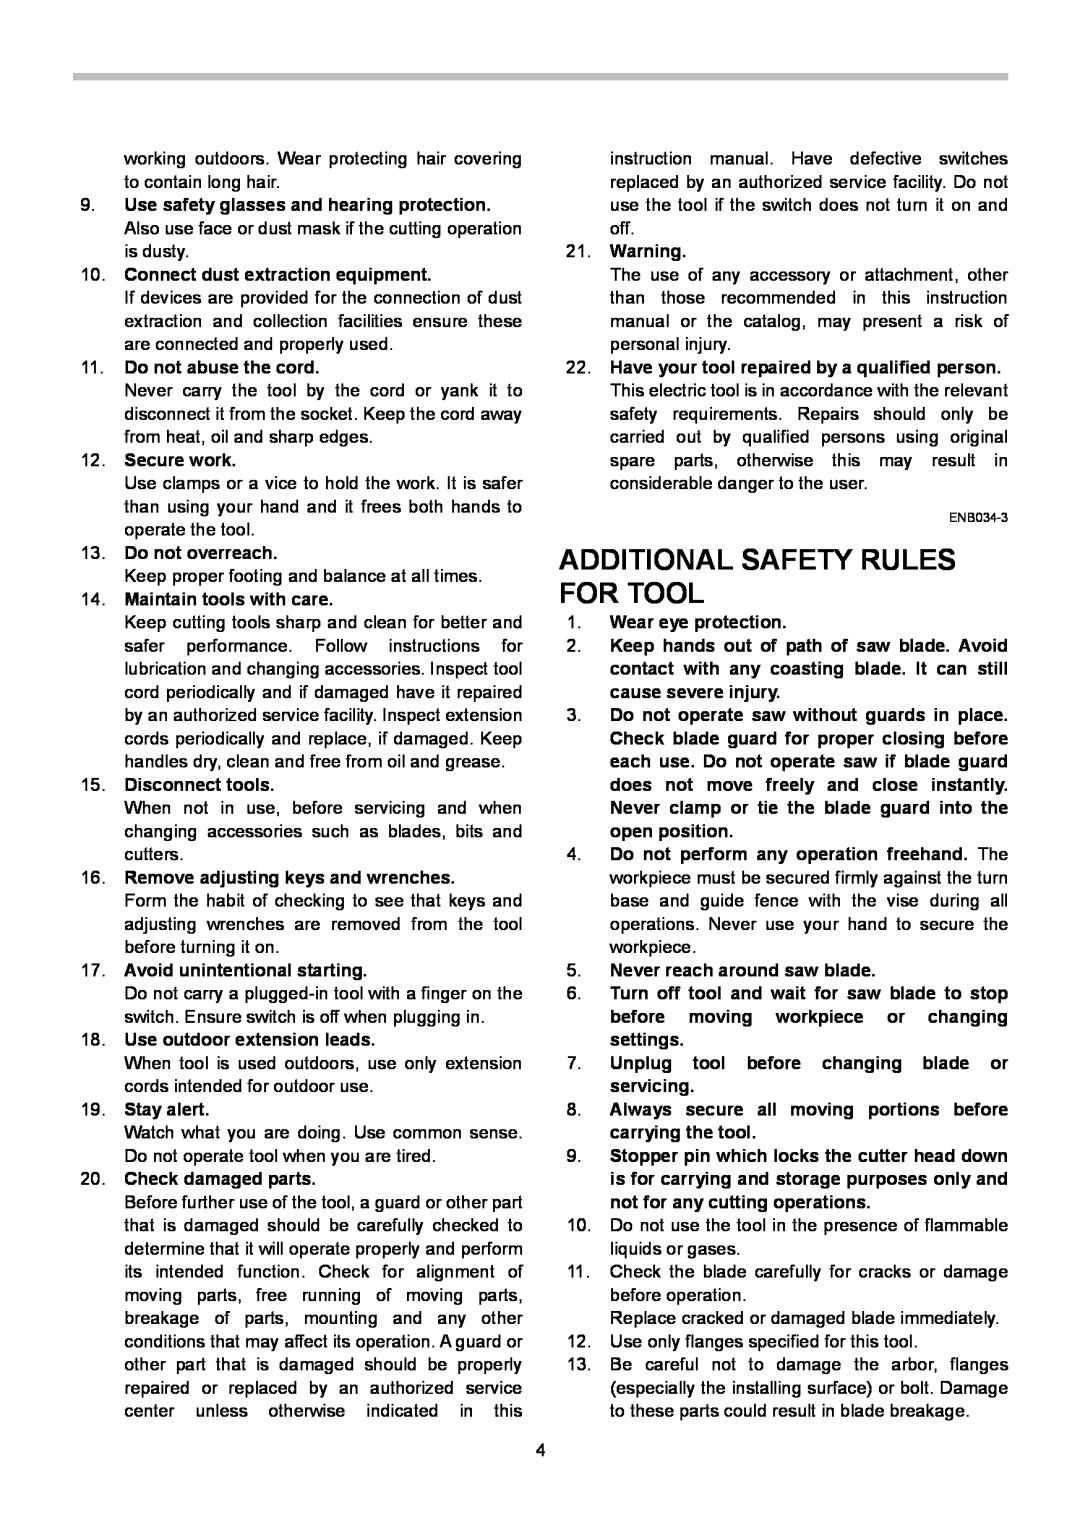 Makita LS1040S instruction manual Additional Safety Rules For Tool 